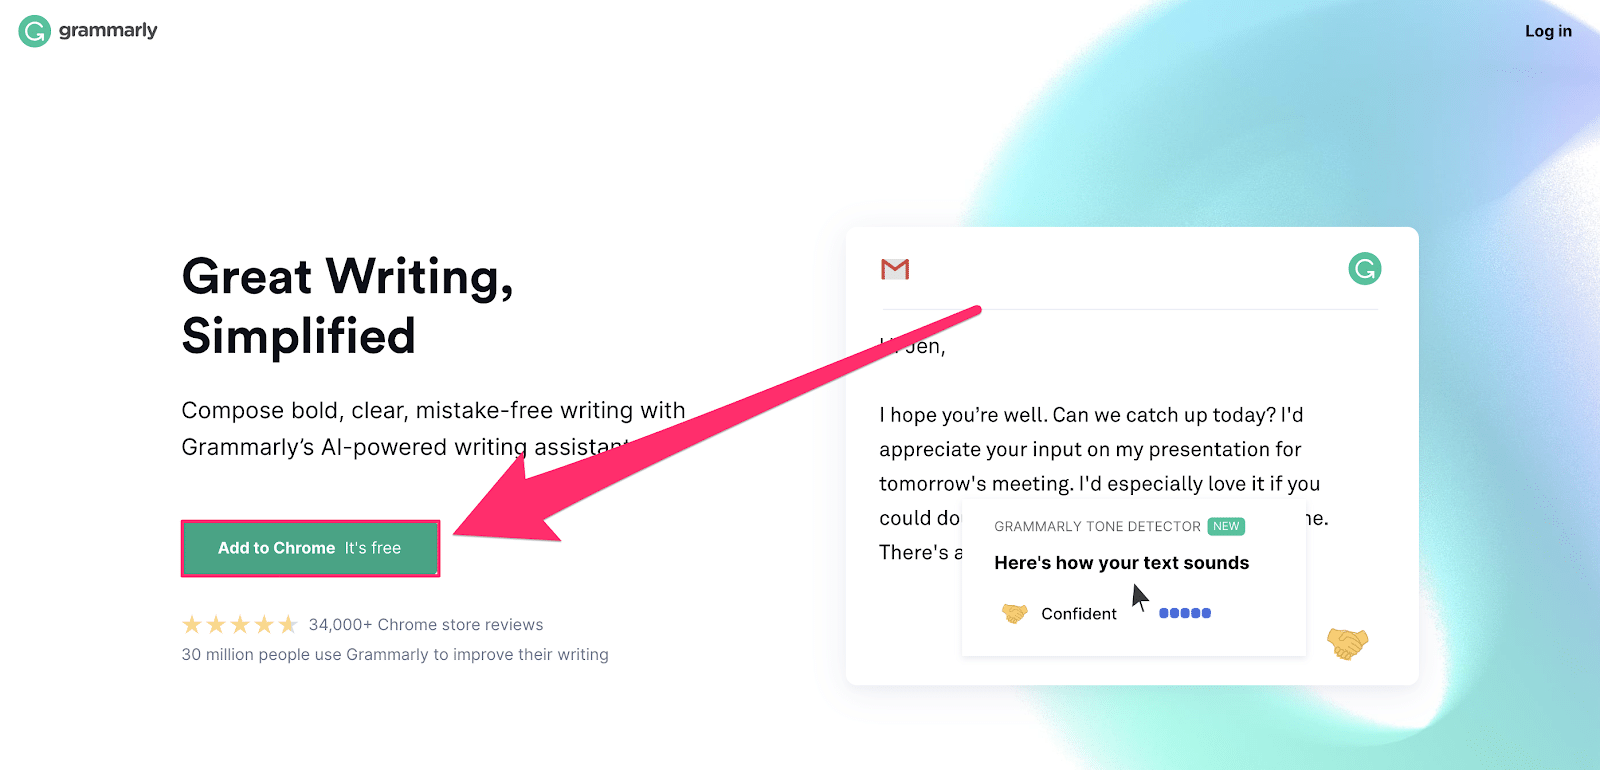 grammarly review featuring homepage with add chrome extension cta